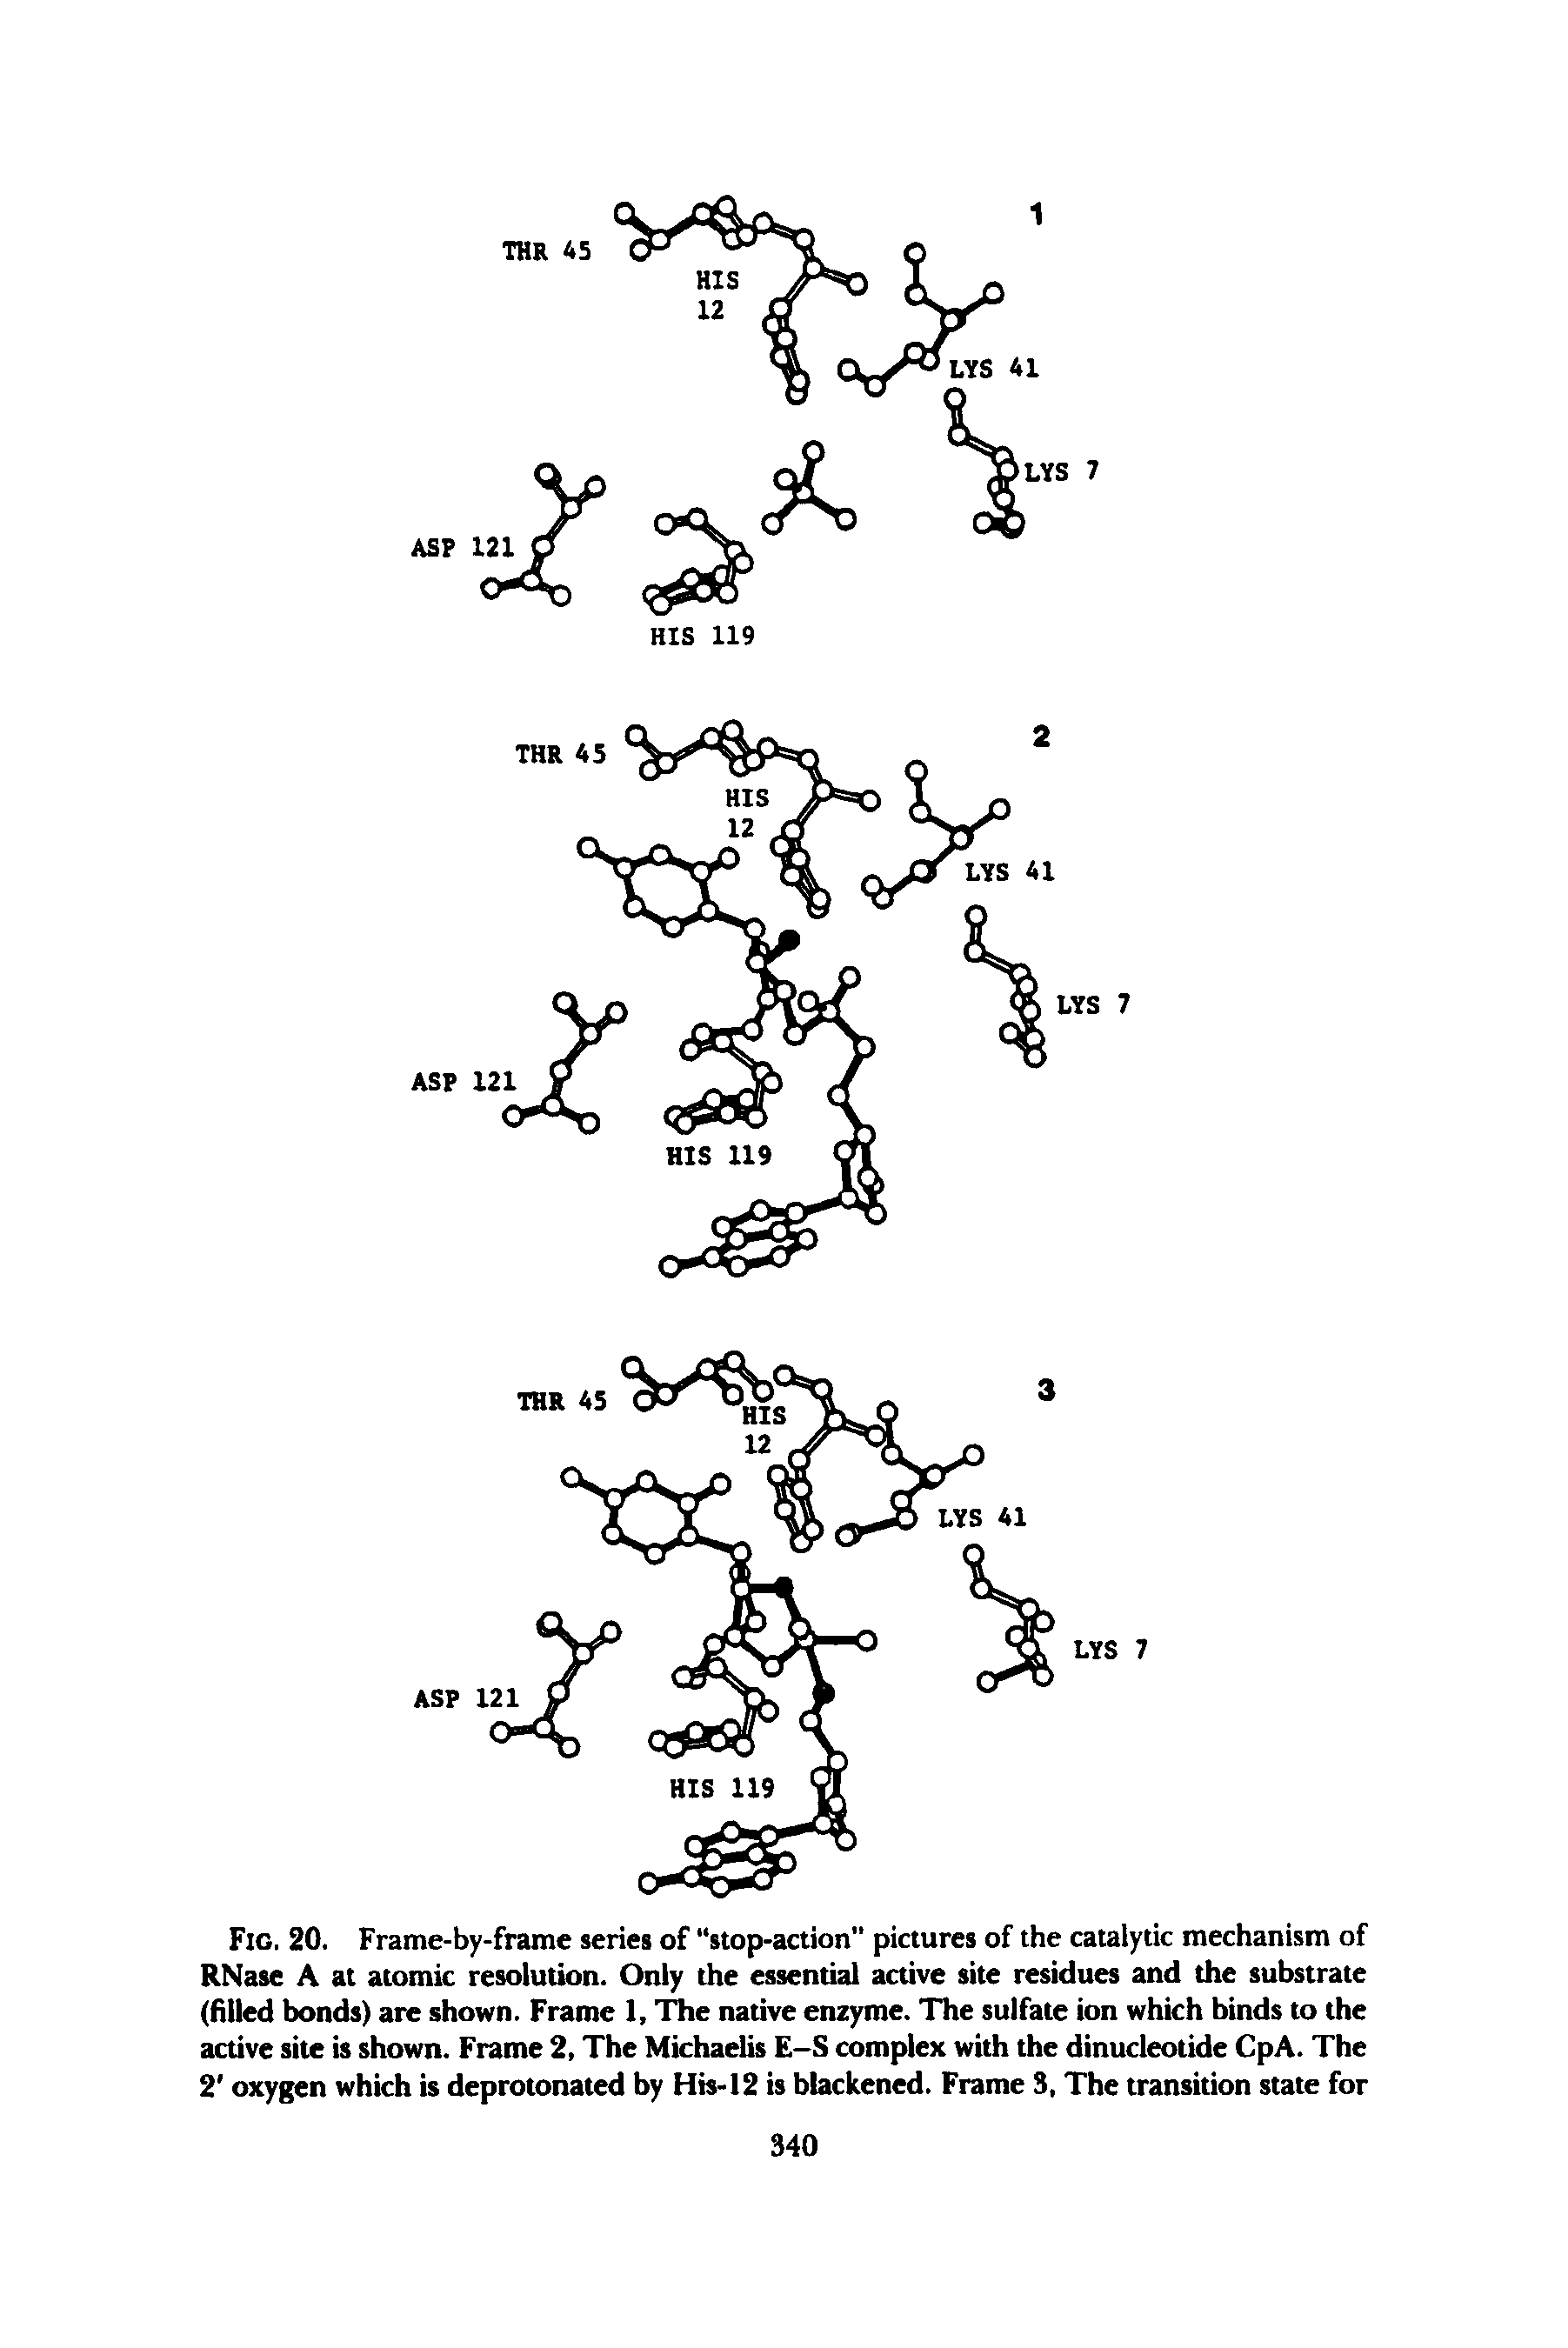 Fig. 20. Frame-by-frame series of stop-action pictures of the catalytic mechanism of RNase A at atomic resolution. Only the essential active site residues and the substrate (filled bonds) are shown. Frame 1, l e native enzyme. The sulfate ion which binds to the active site is shown. Frame 2, The Michaelis E-S complex with the dinucleotide CpA. The 2 oxygen which is deprotonated by His-12 is blackened. Frame 3, The transition state for...